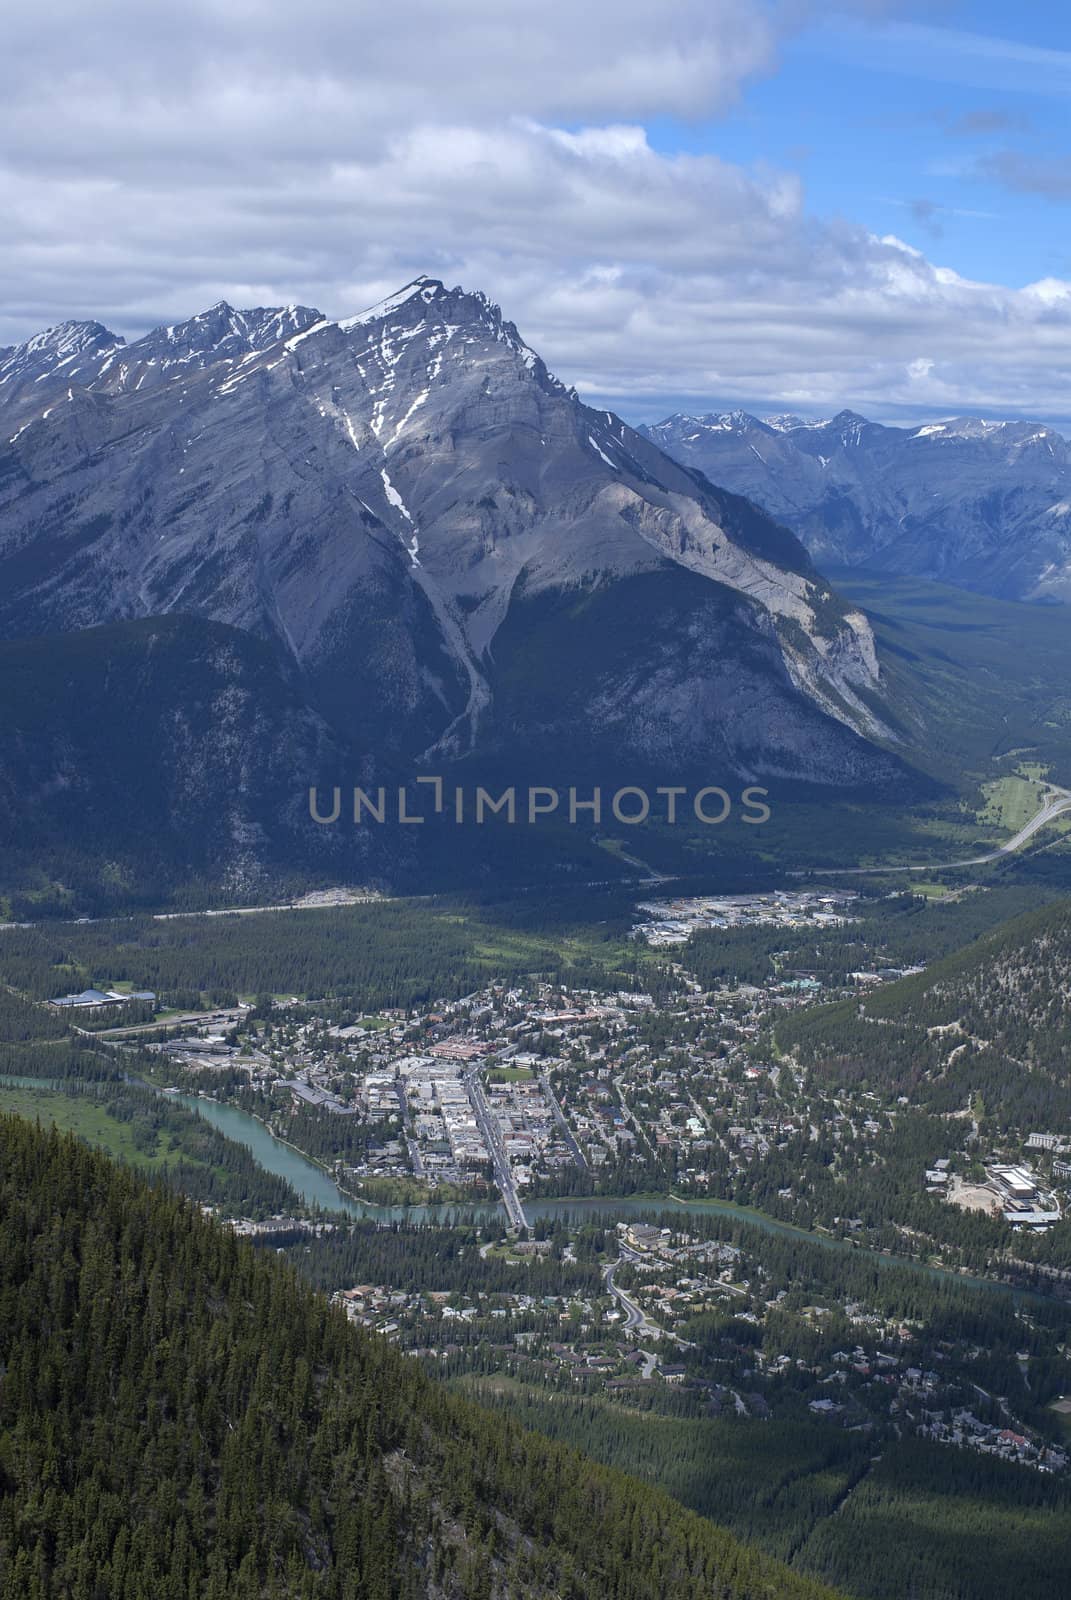 The valley of Banff as seen from high up the mountain - Canada. by Claudine